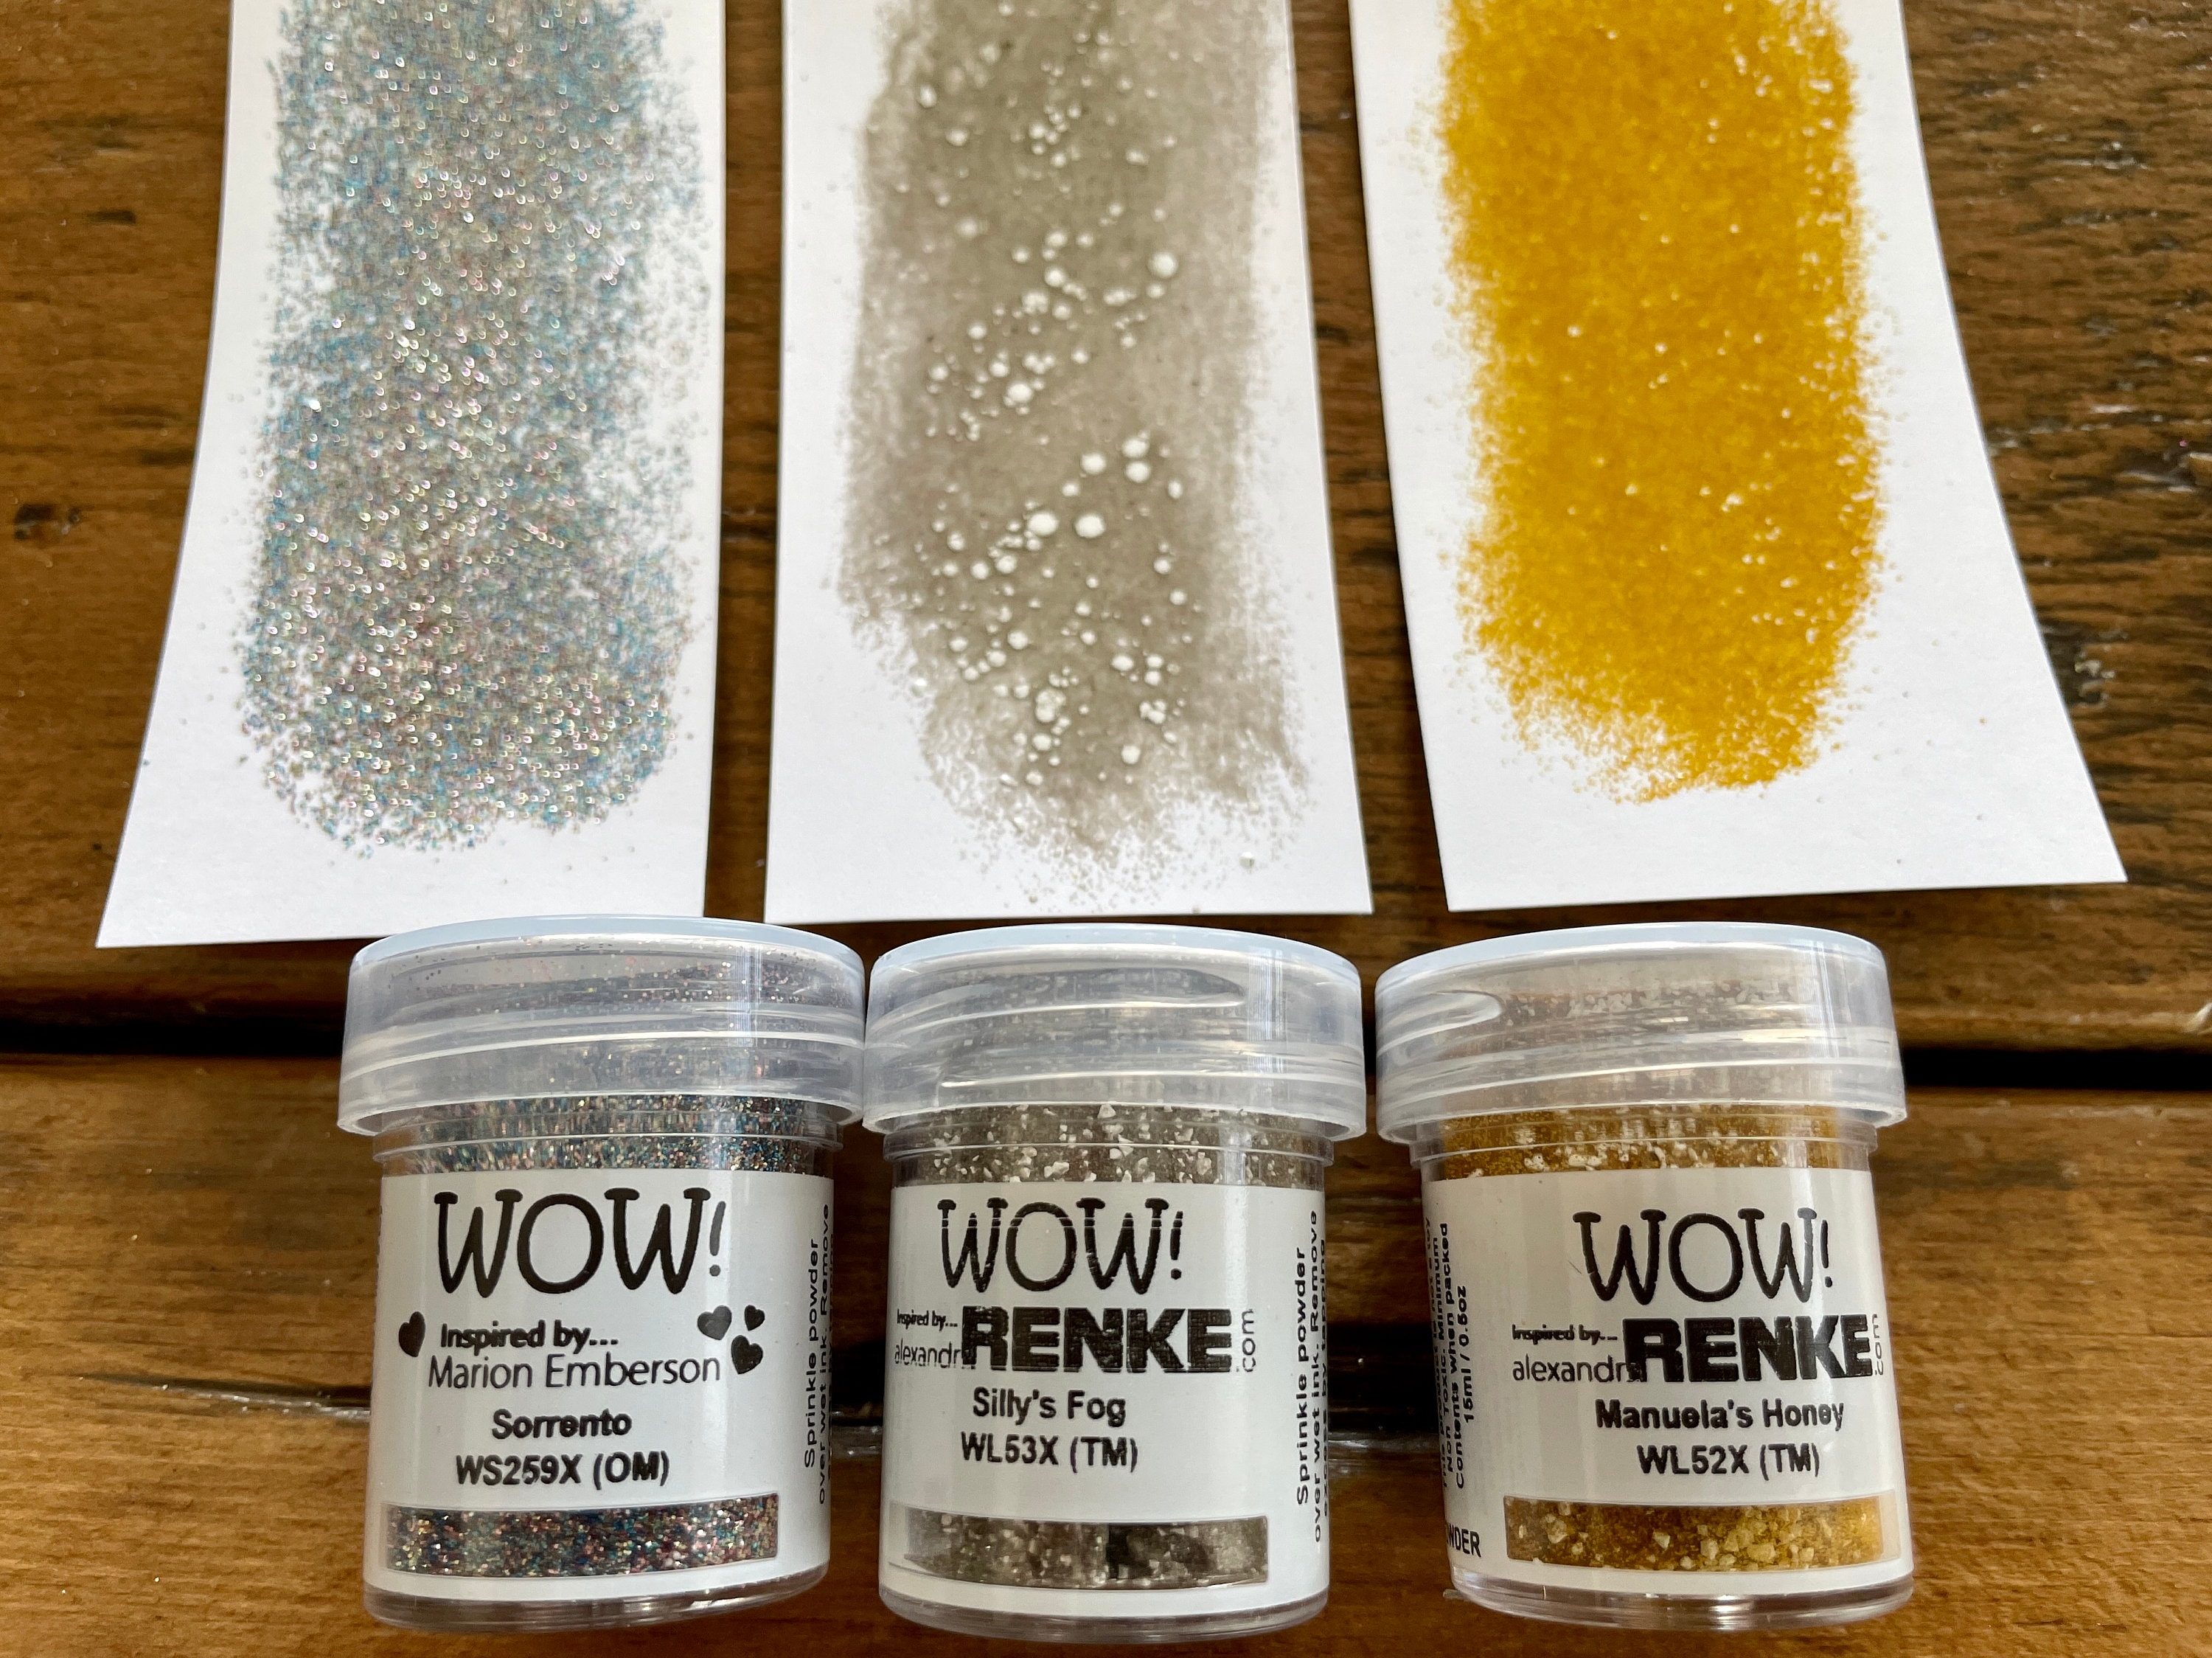 Cargo Embossing Powder by WOW – Catherine Pooler Designs